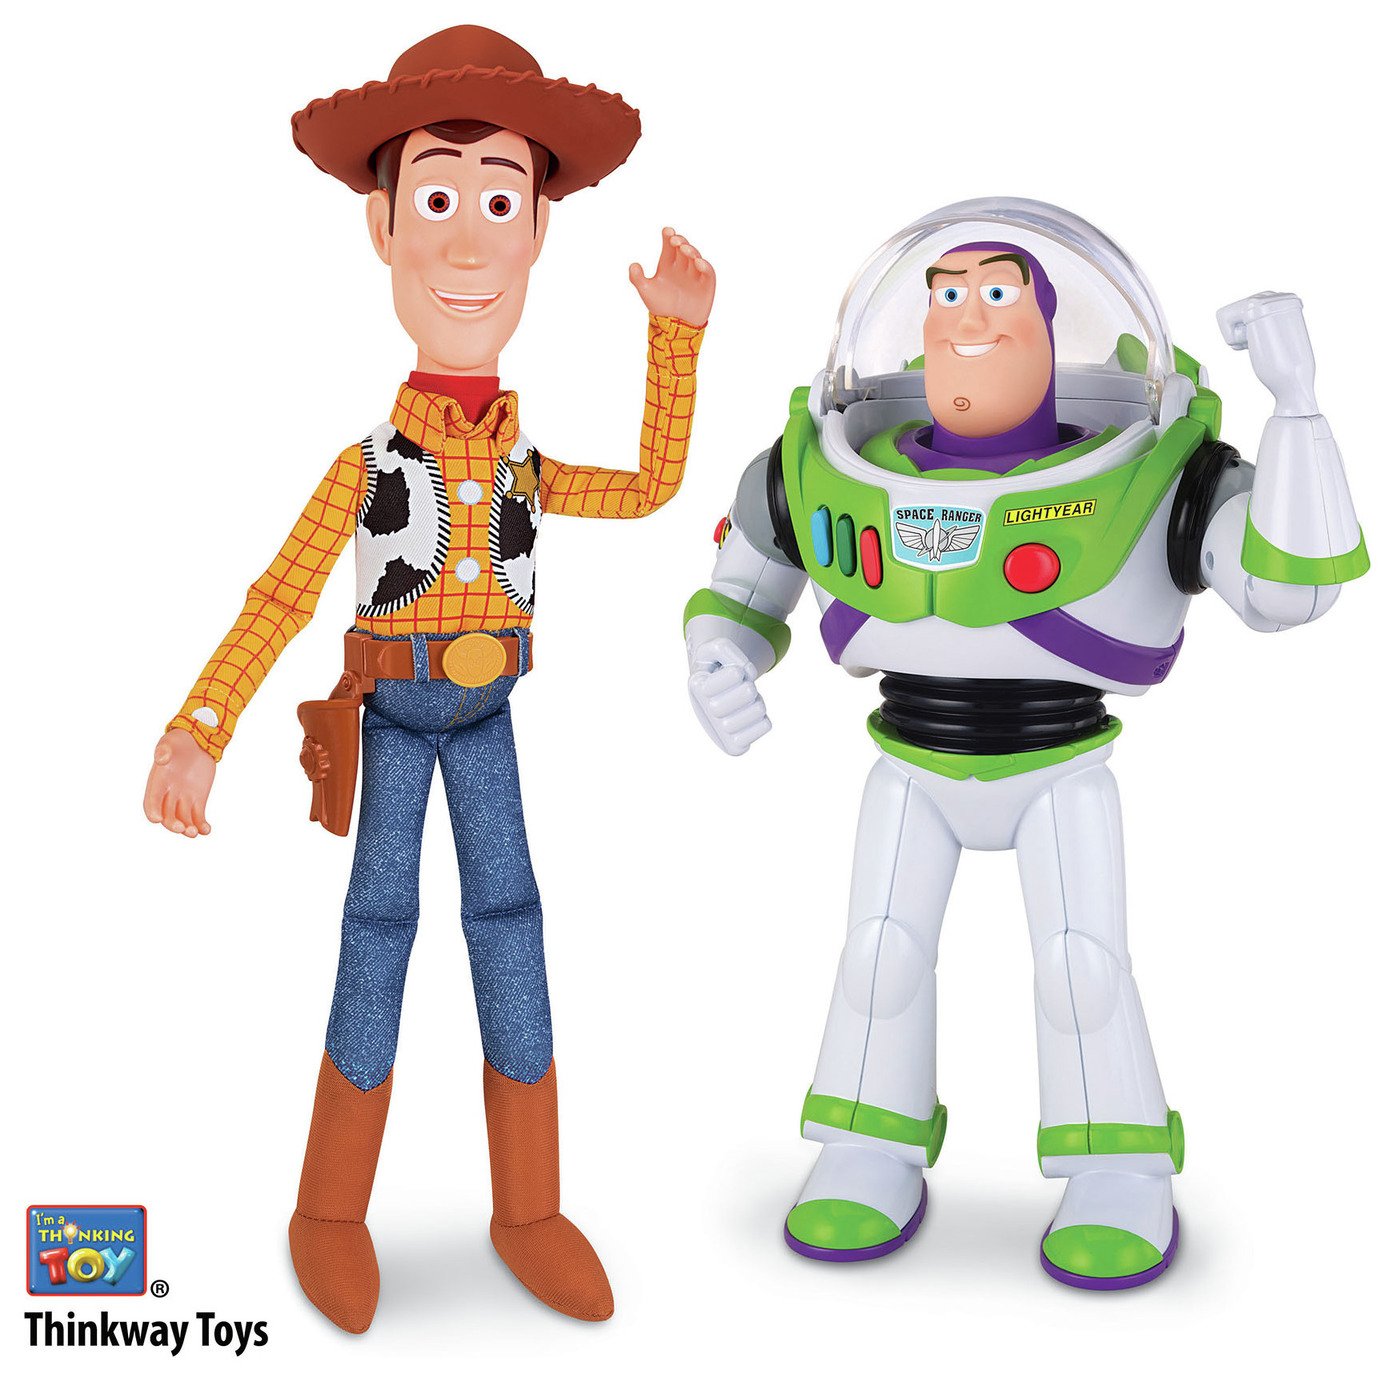 Disney Toy Story Woody and Buzz Talking Figures